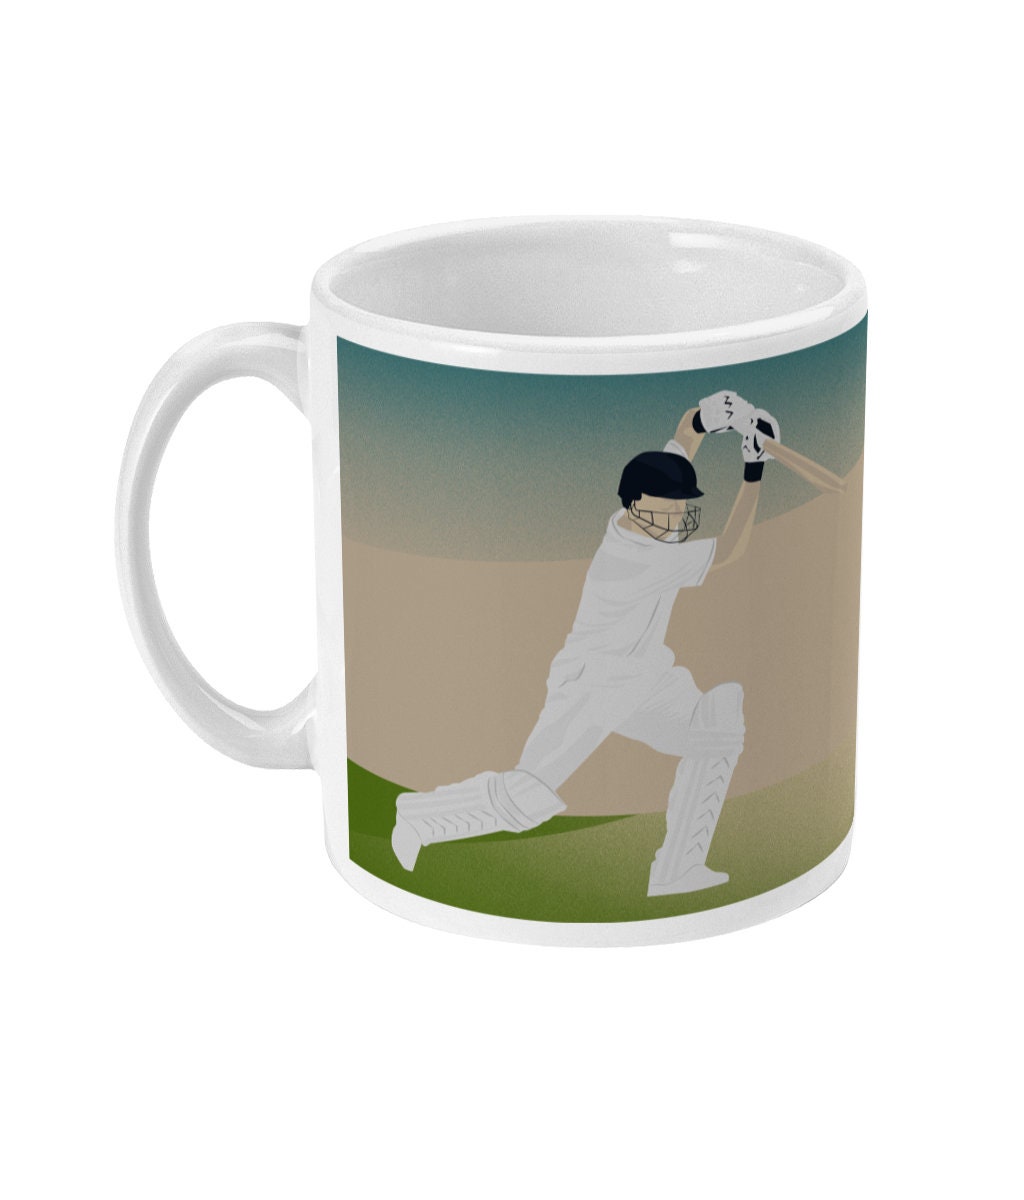 Cricket "Cover Drive" cup or mug - Customizable